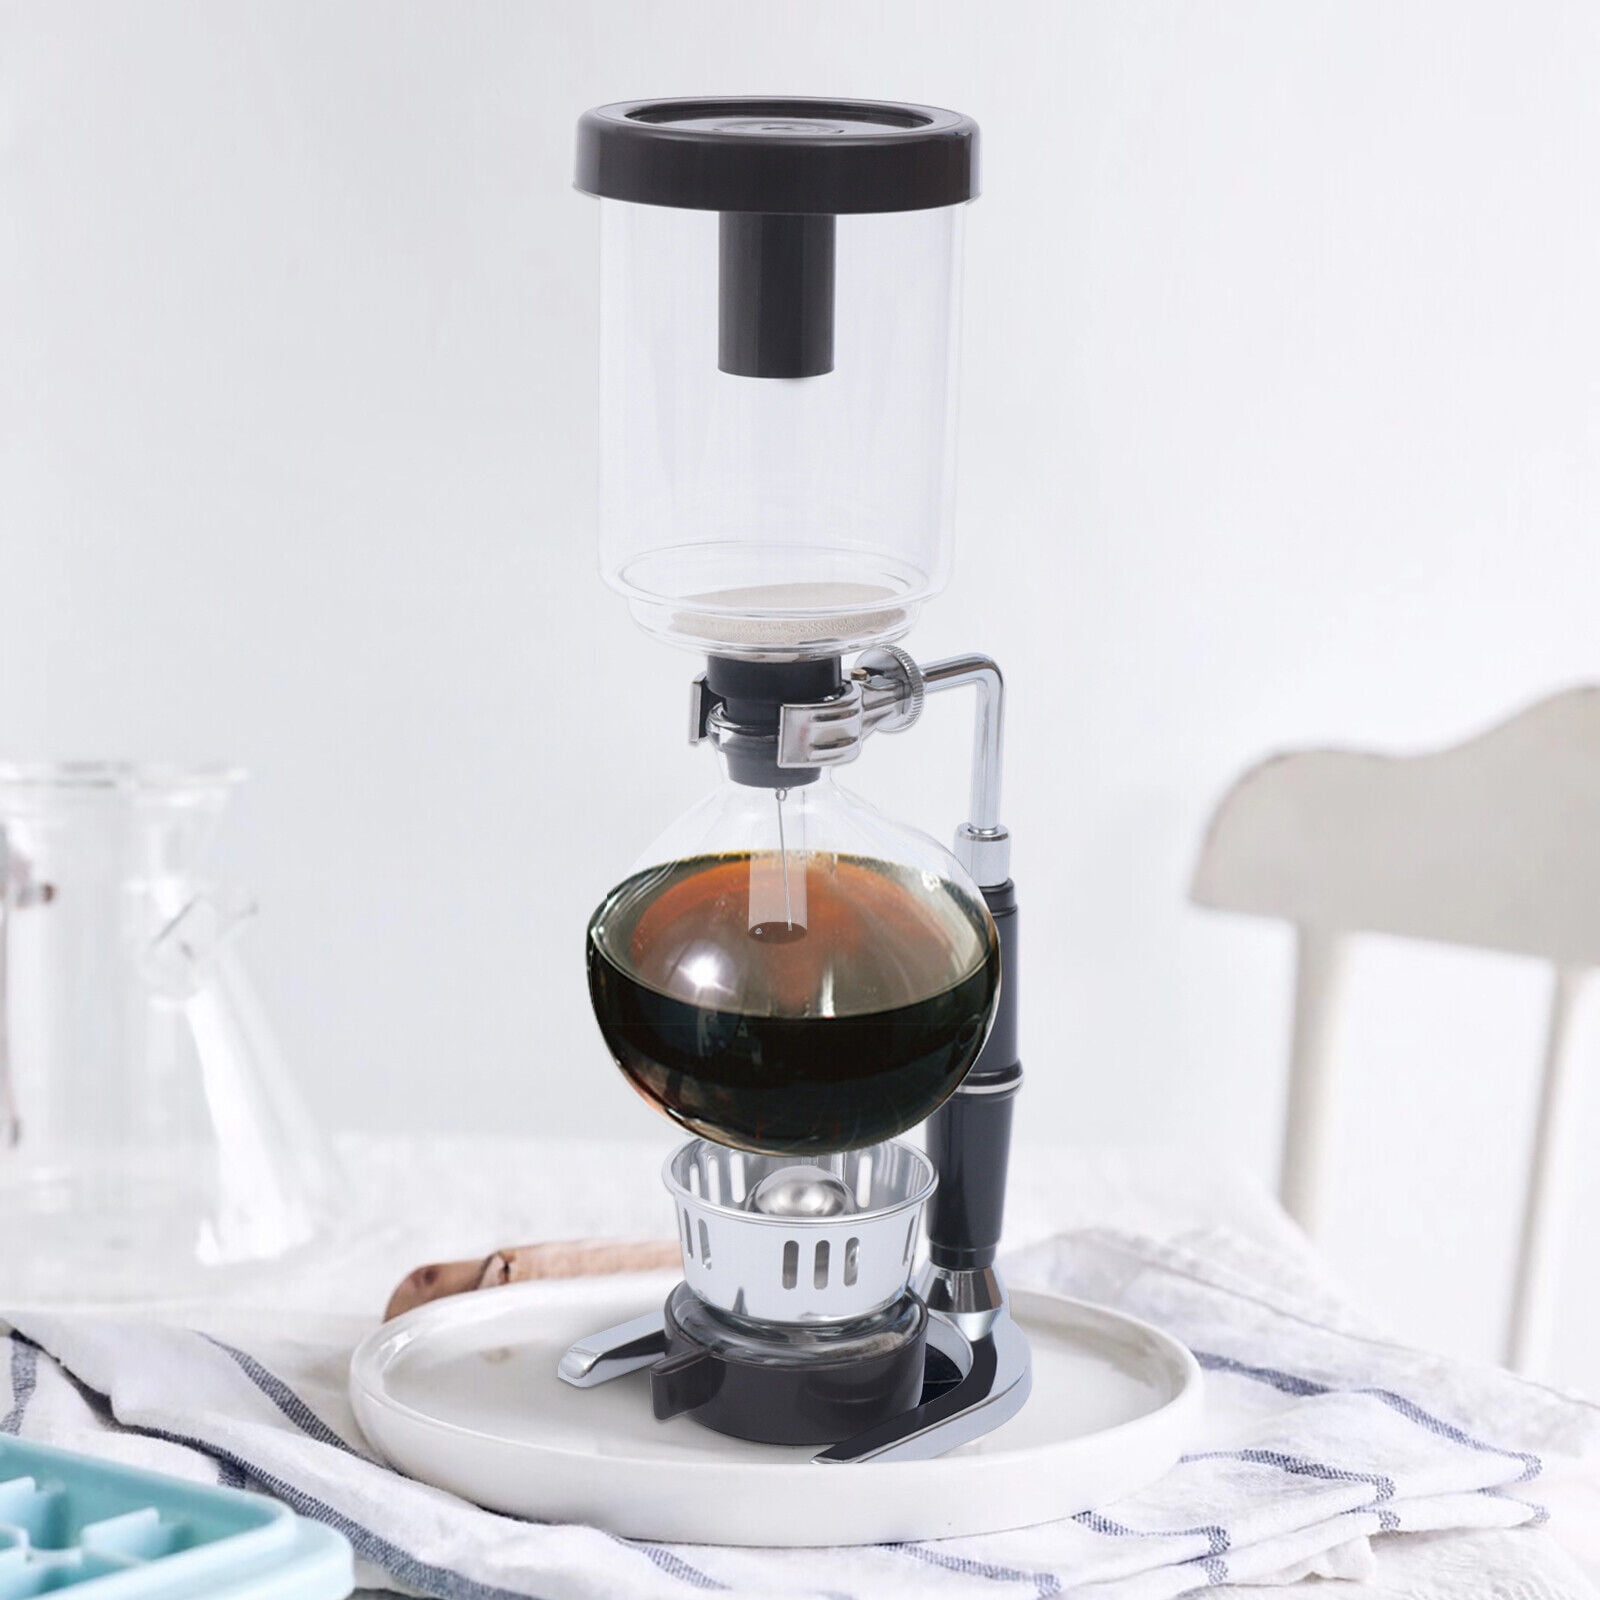 siphon coffee maker with fresh espresso in glass coffee pot on